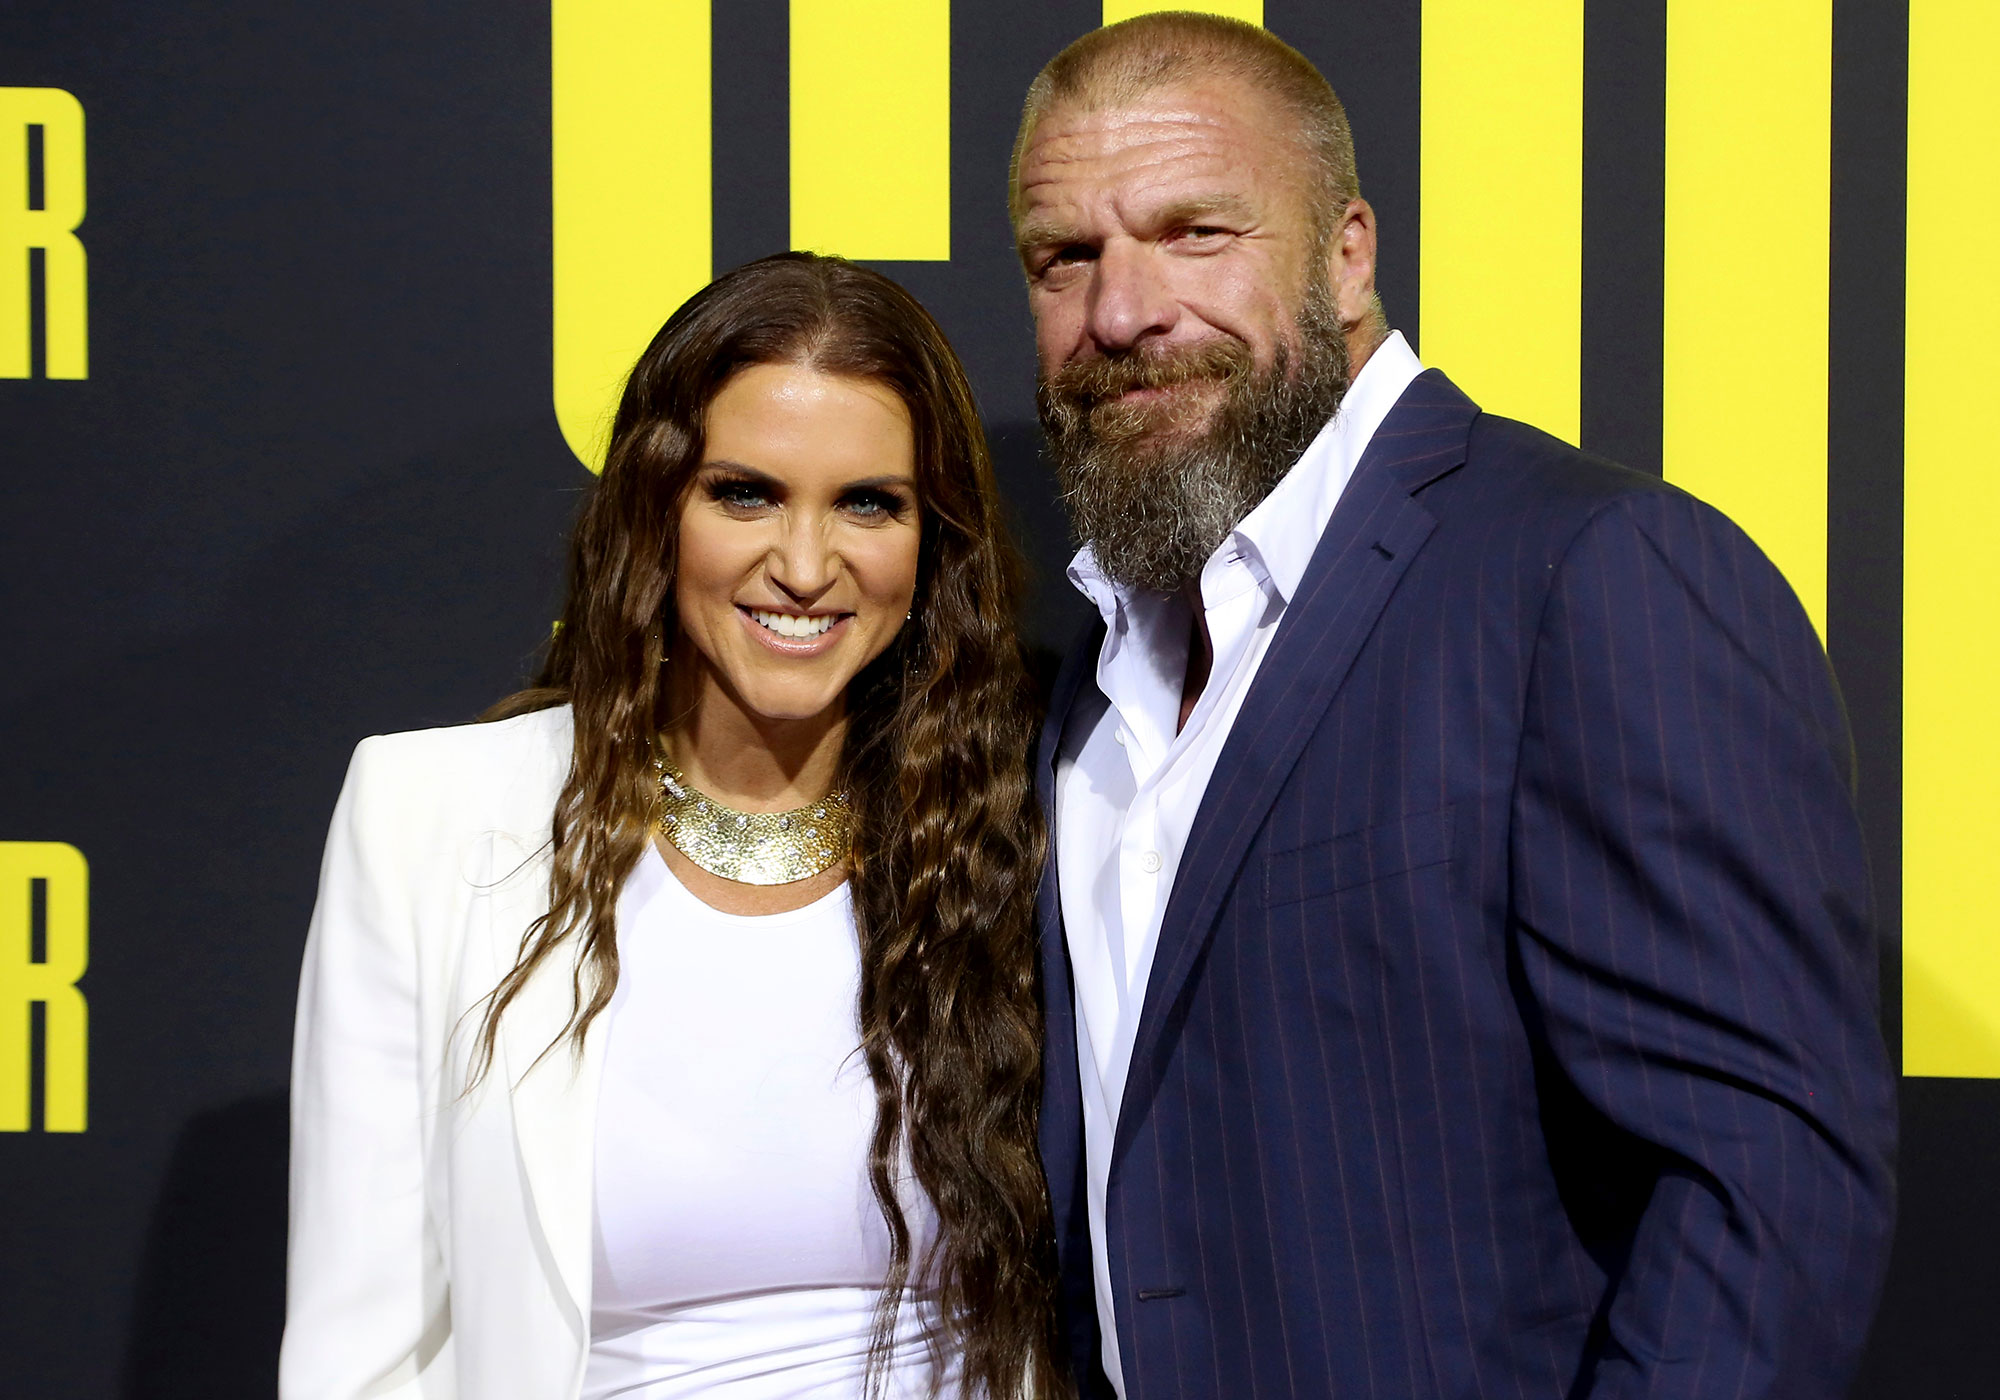 Wwe Mcmohan Xxx - WWE's Stephanie McMahon and Wrestler Triple H's Relationship Timeline